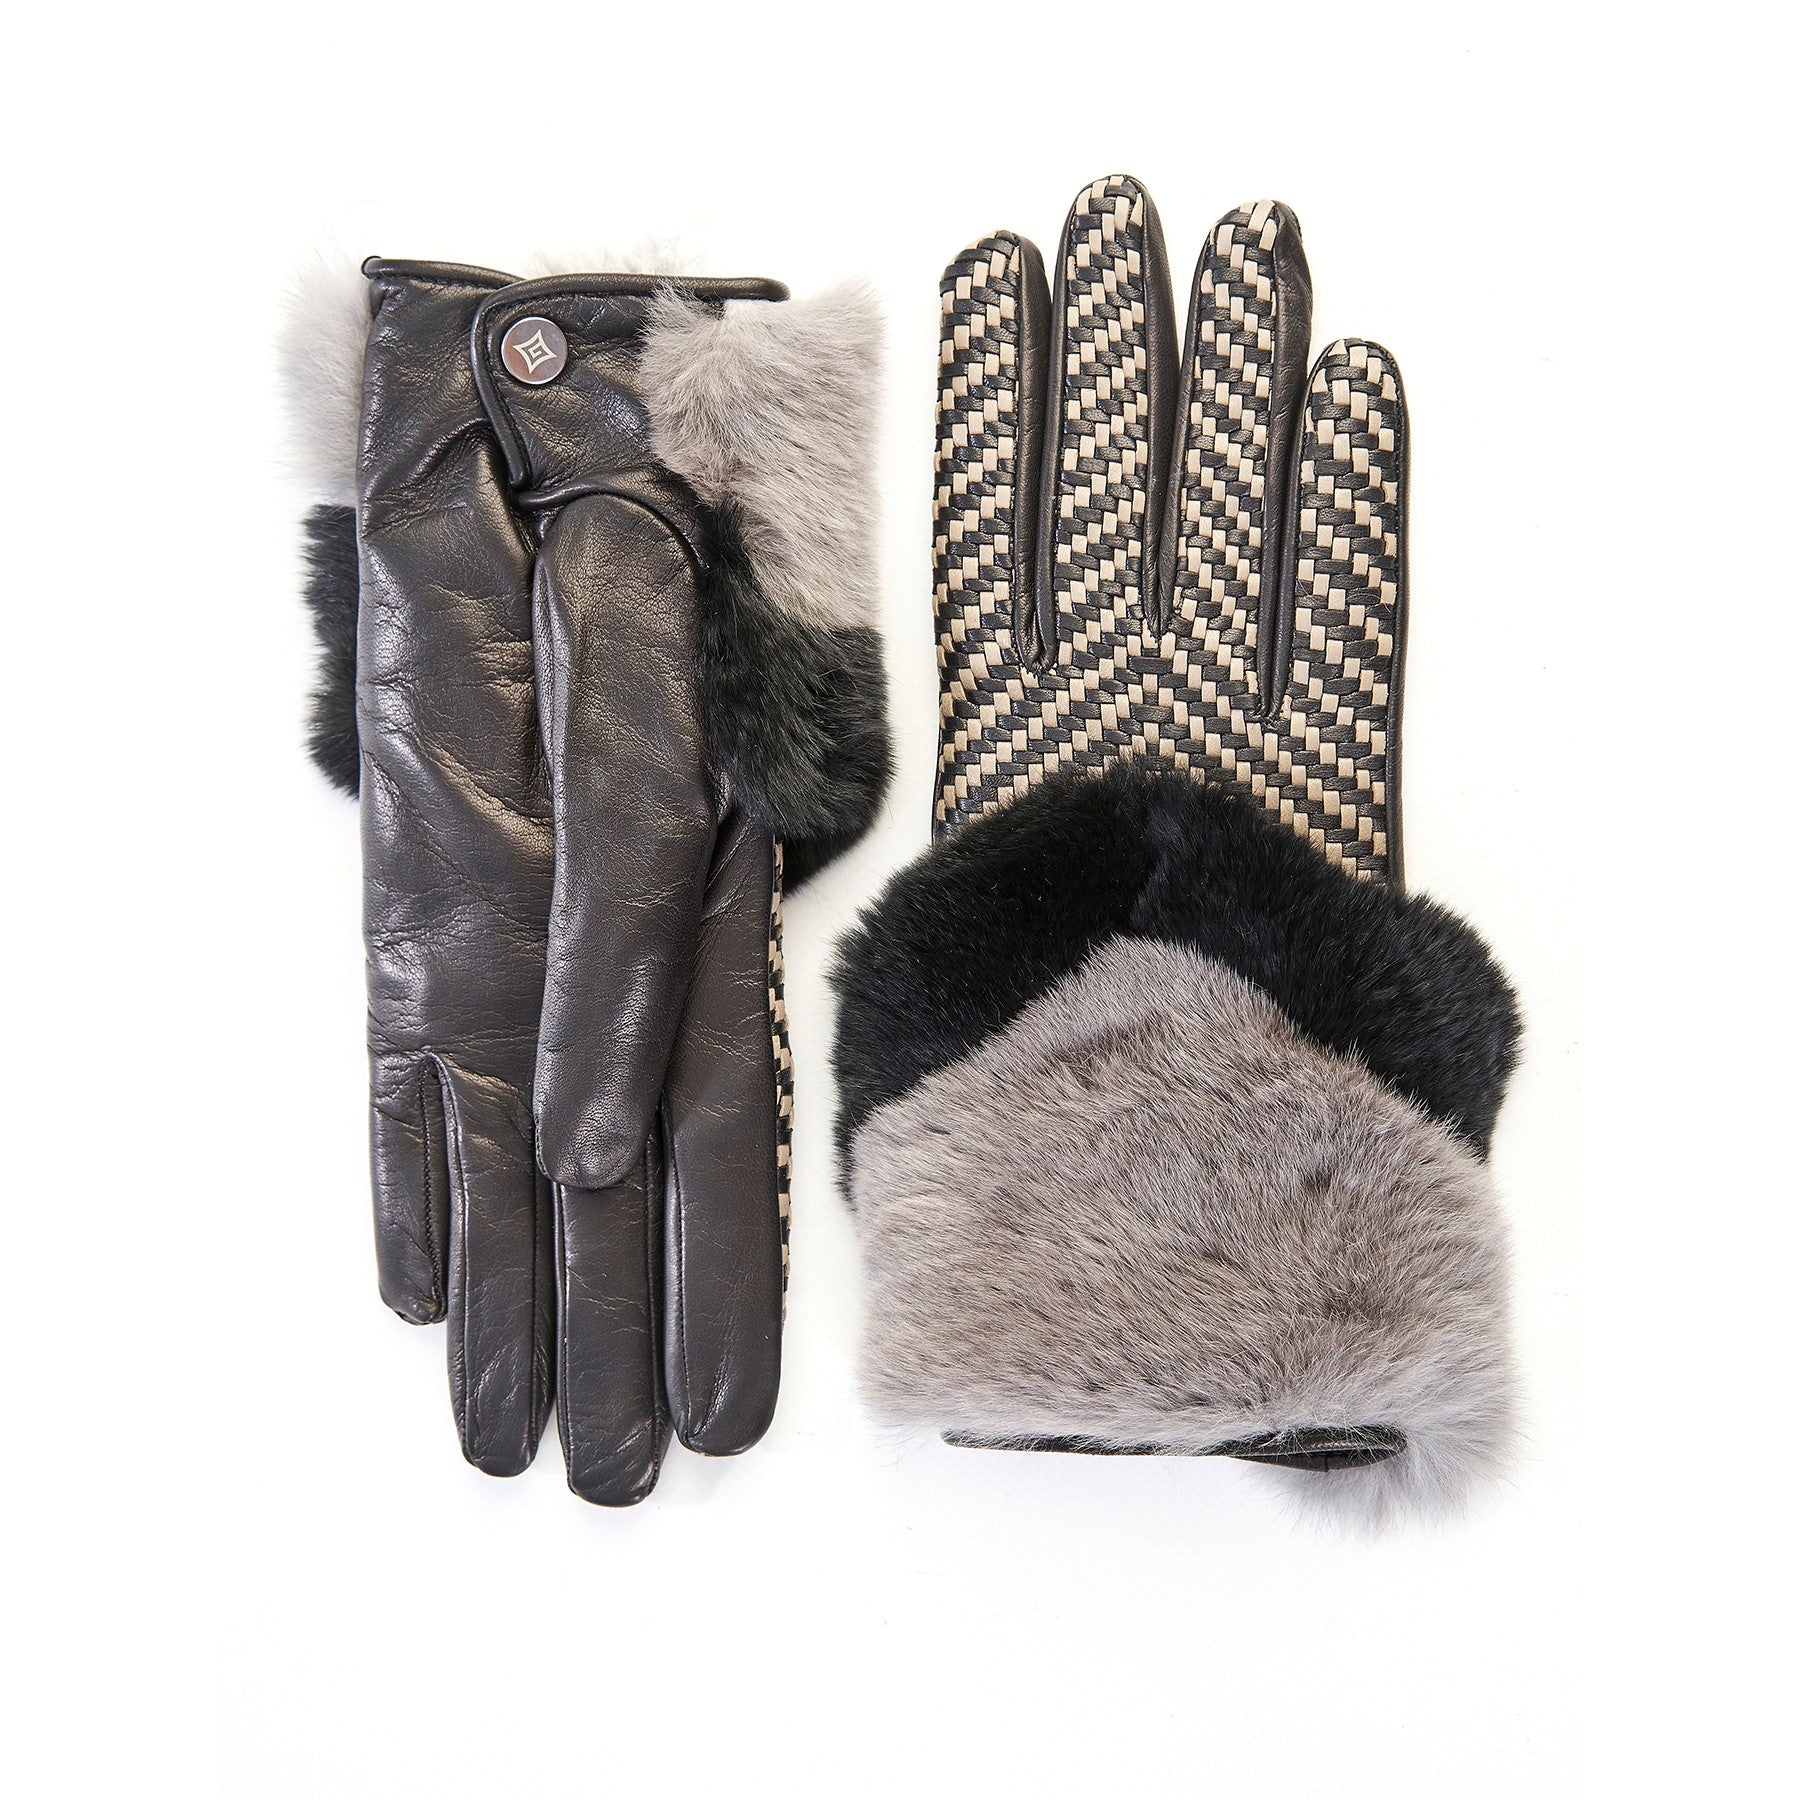 Women's black leather gloves with bicolor woven top panel and rex rabbit fur cuff